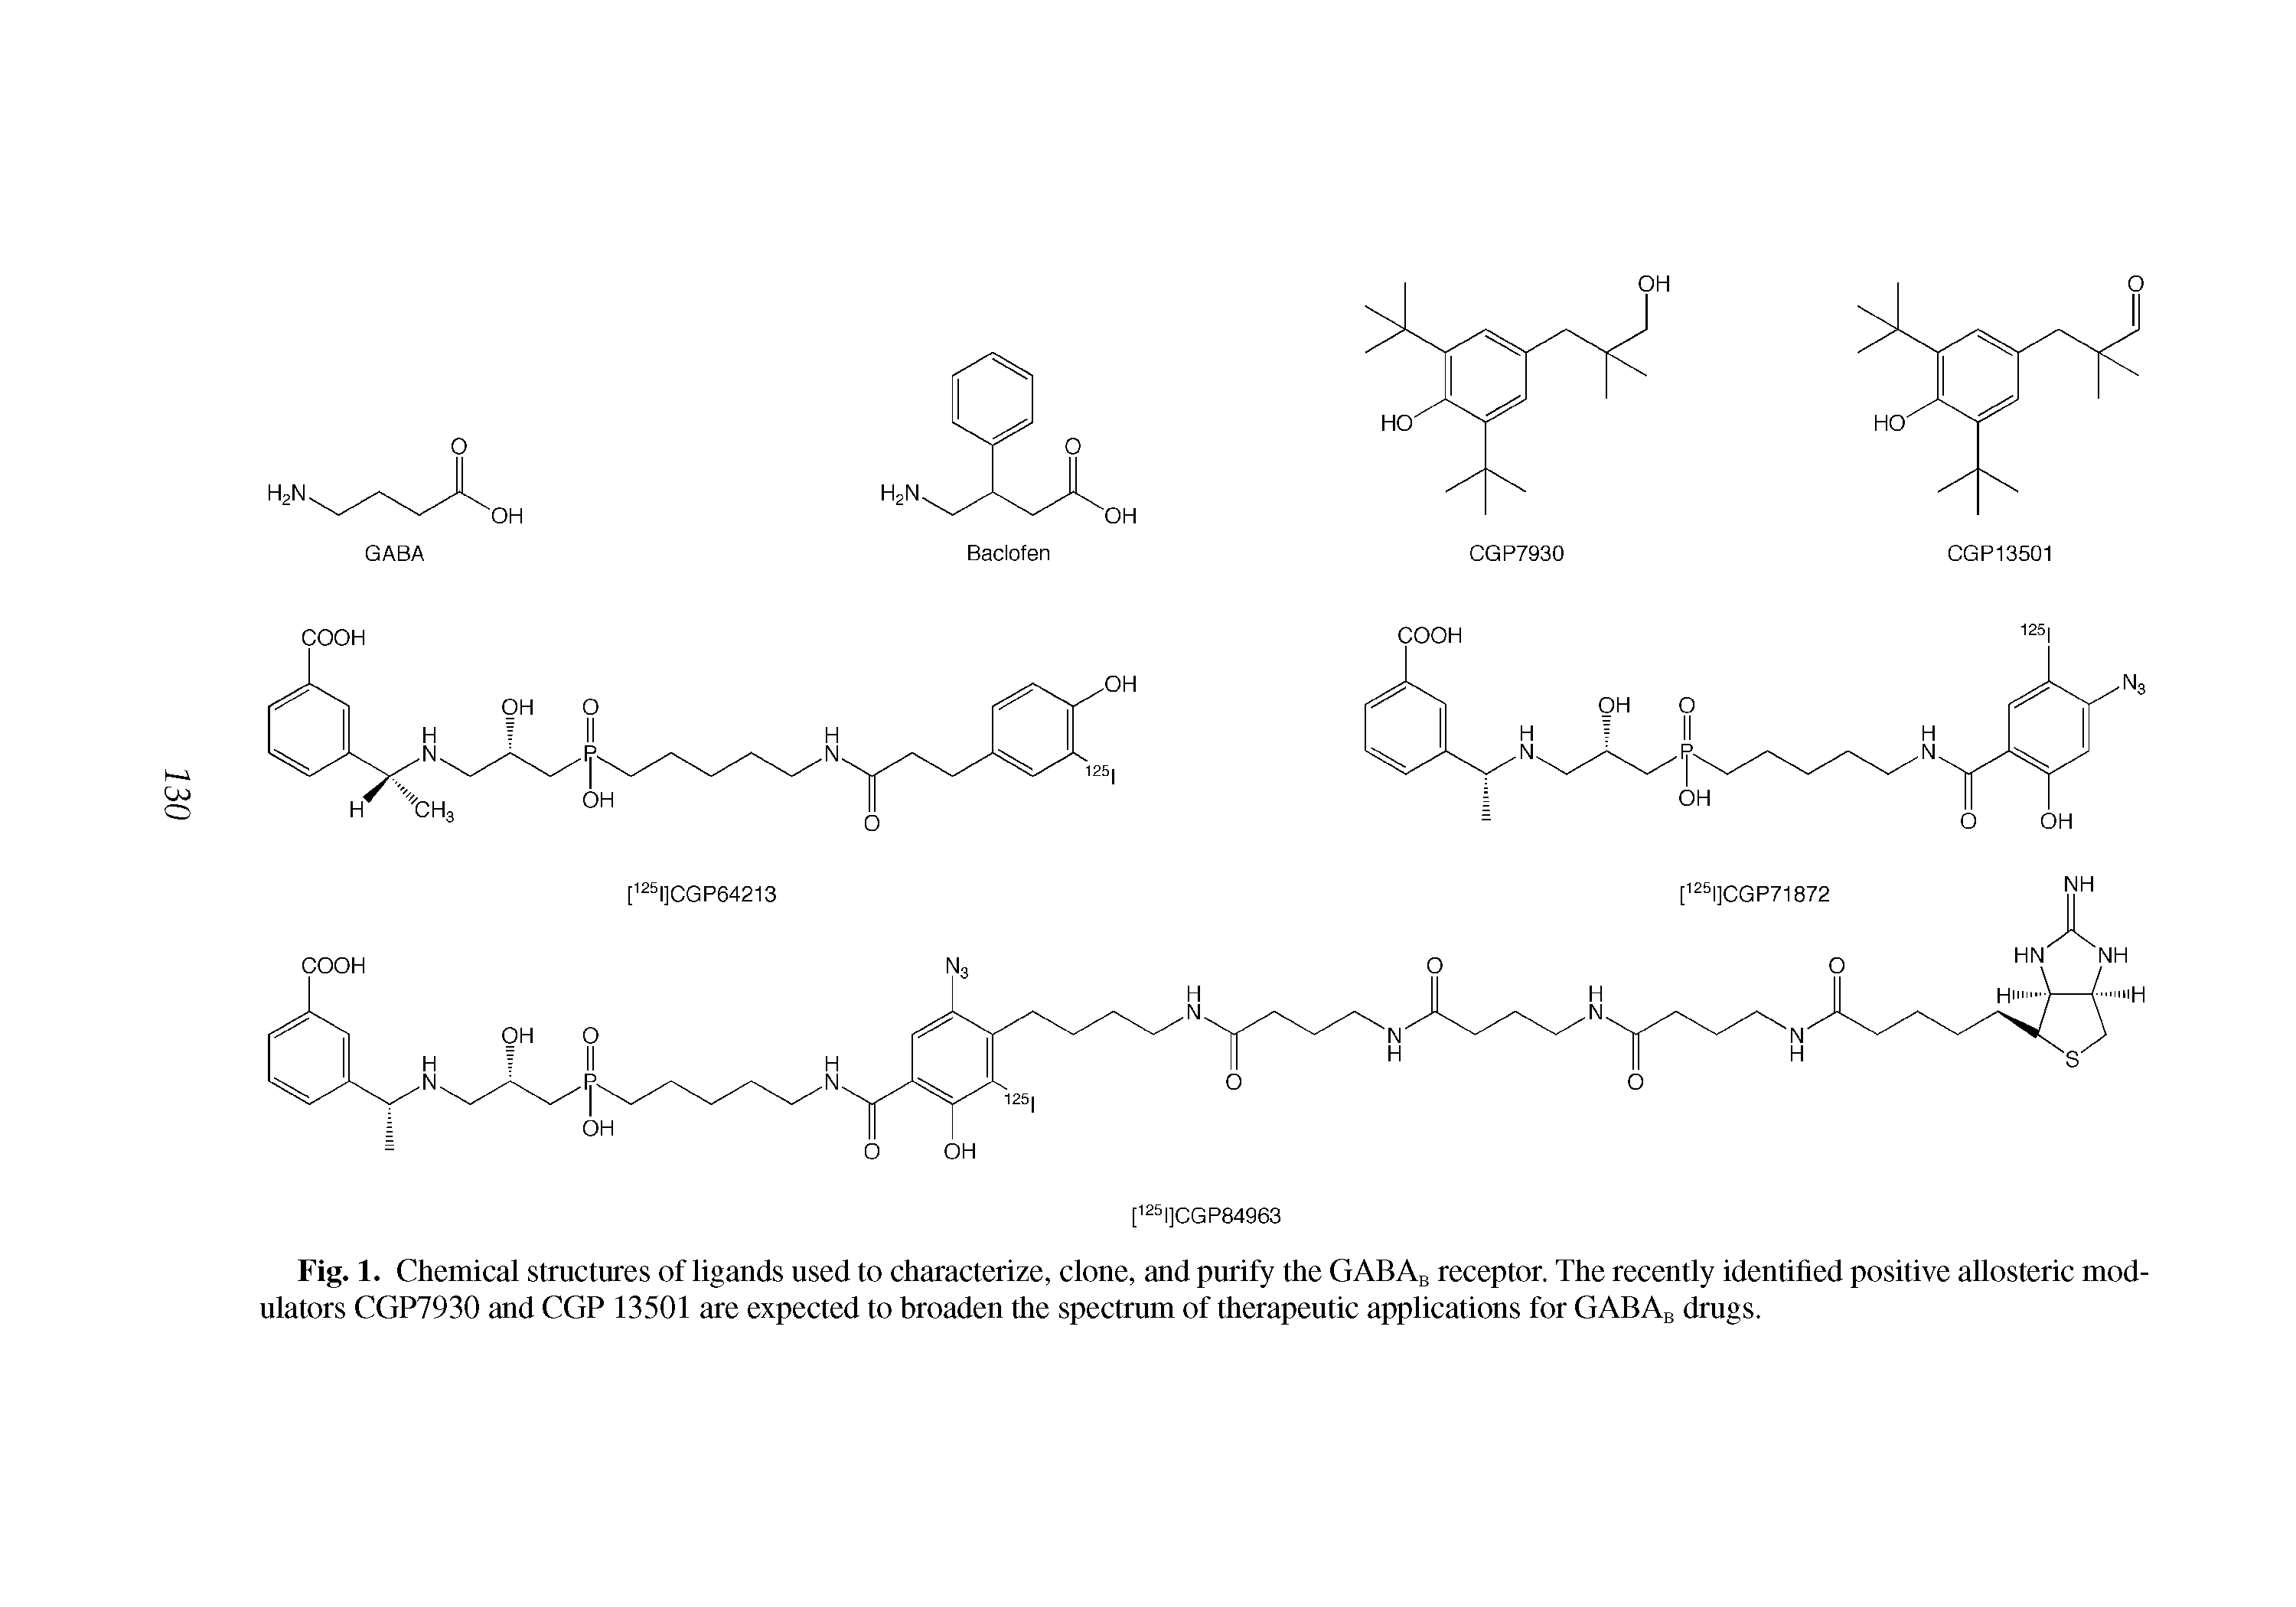 Fig. 1. Chemical structures of ligands used to characterize, clone, and purify the GABAb receptor. The recently identified positive allosteric modulators CGP7930 and CGP 13501 are expected to broaden the spectrum of therapeutic applications for GABAb drugs.